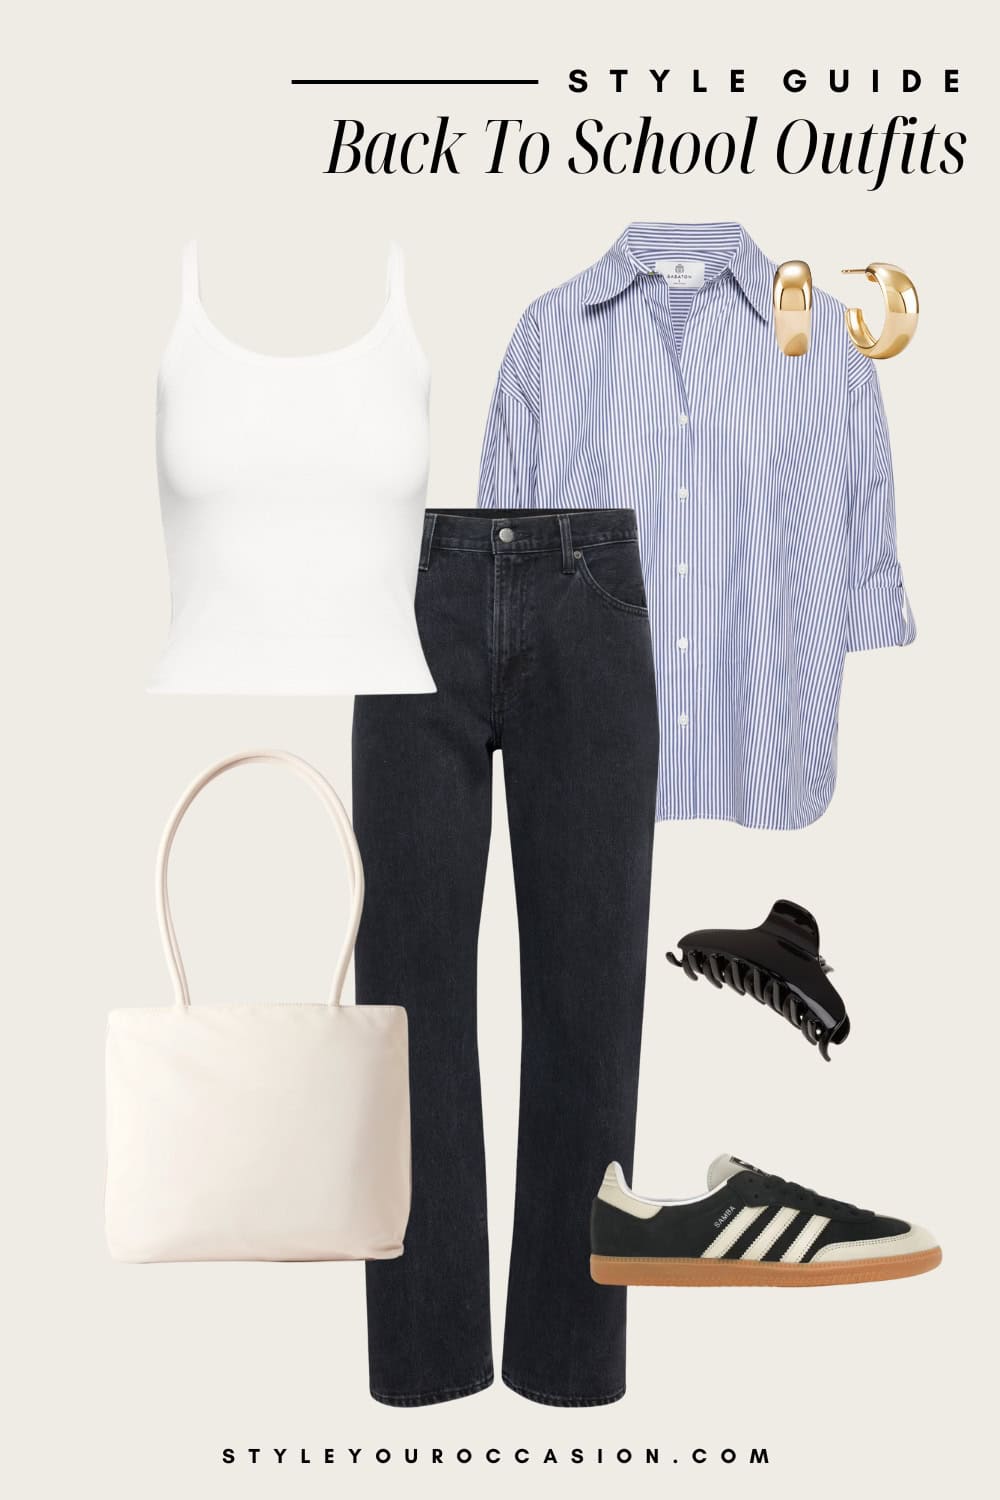 Flat lay outfit graphic of black jeans, a white tank top, a blue and white striped button down and black and white sneakers.